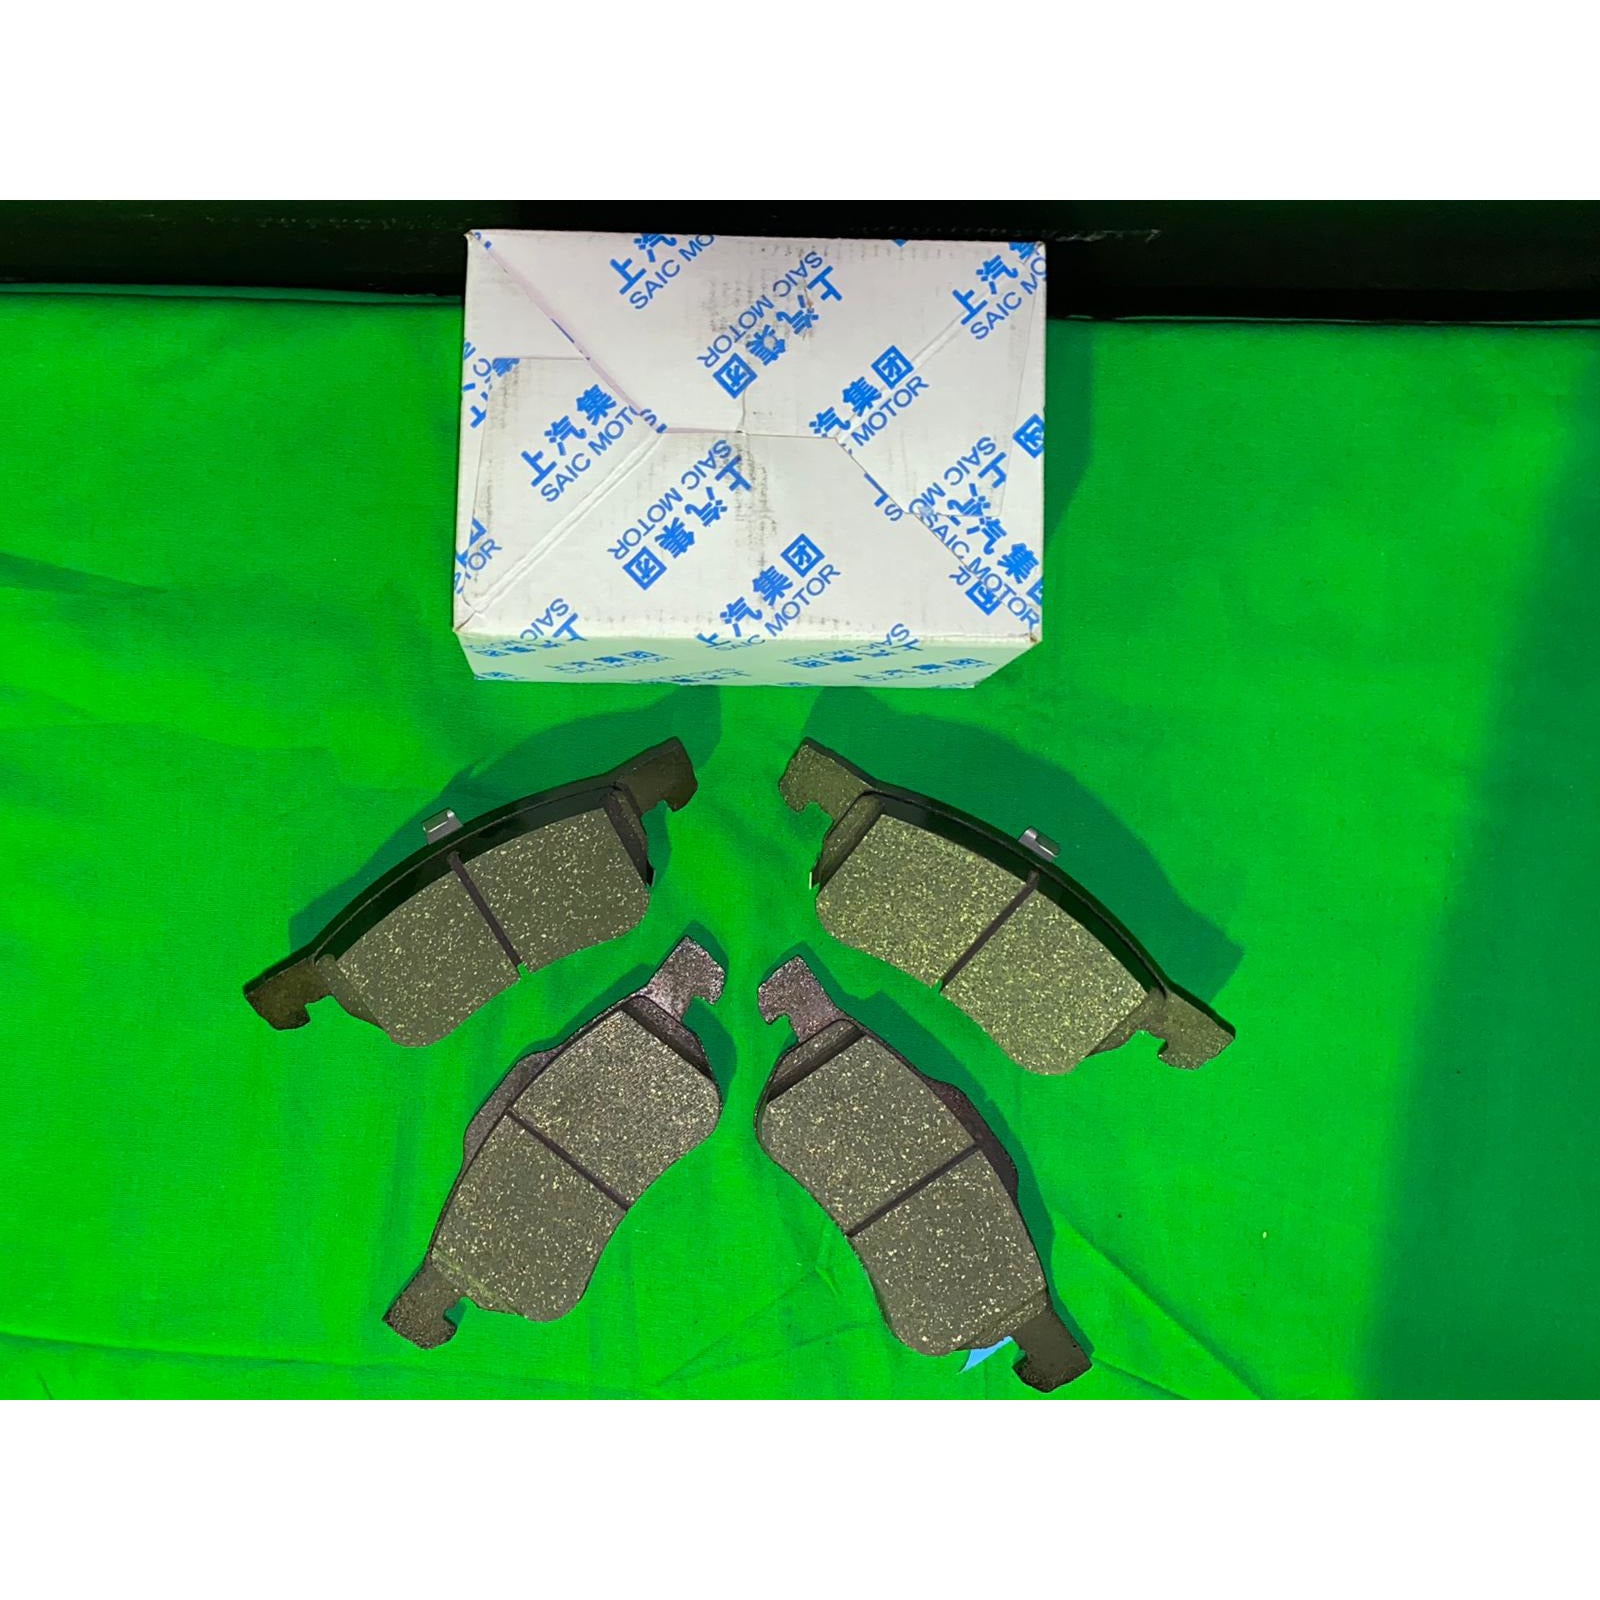 OEM MG ZS Front Brake Pads Set - Genuine MG ZS Parts & Accessories | ARG Parts & Accessories.